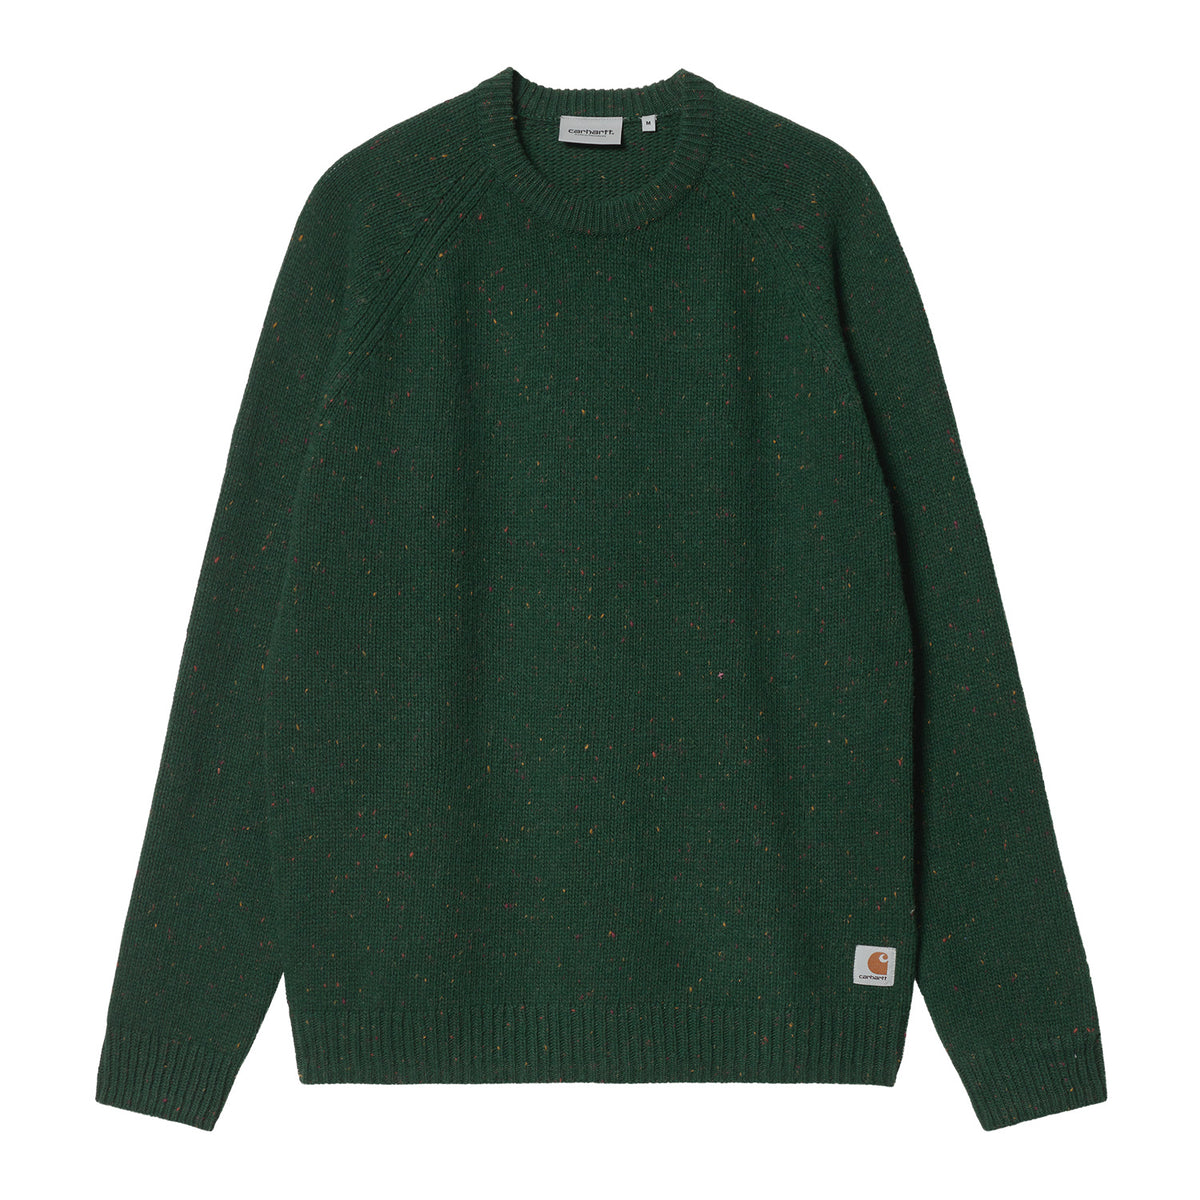 Carhartt Angelistic Sweater - Speckled Grove